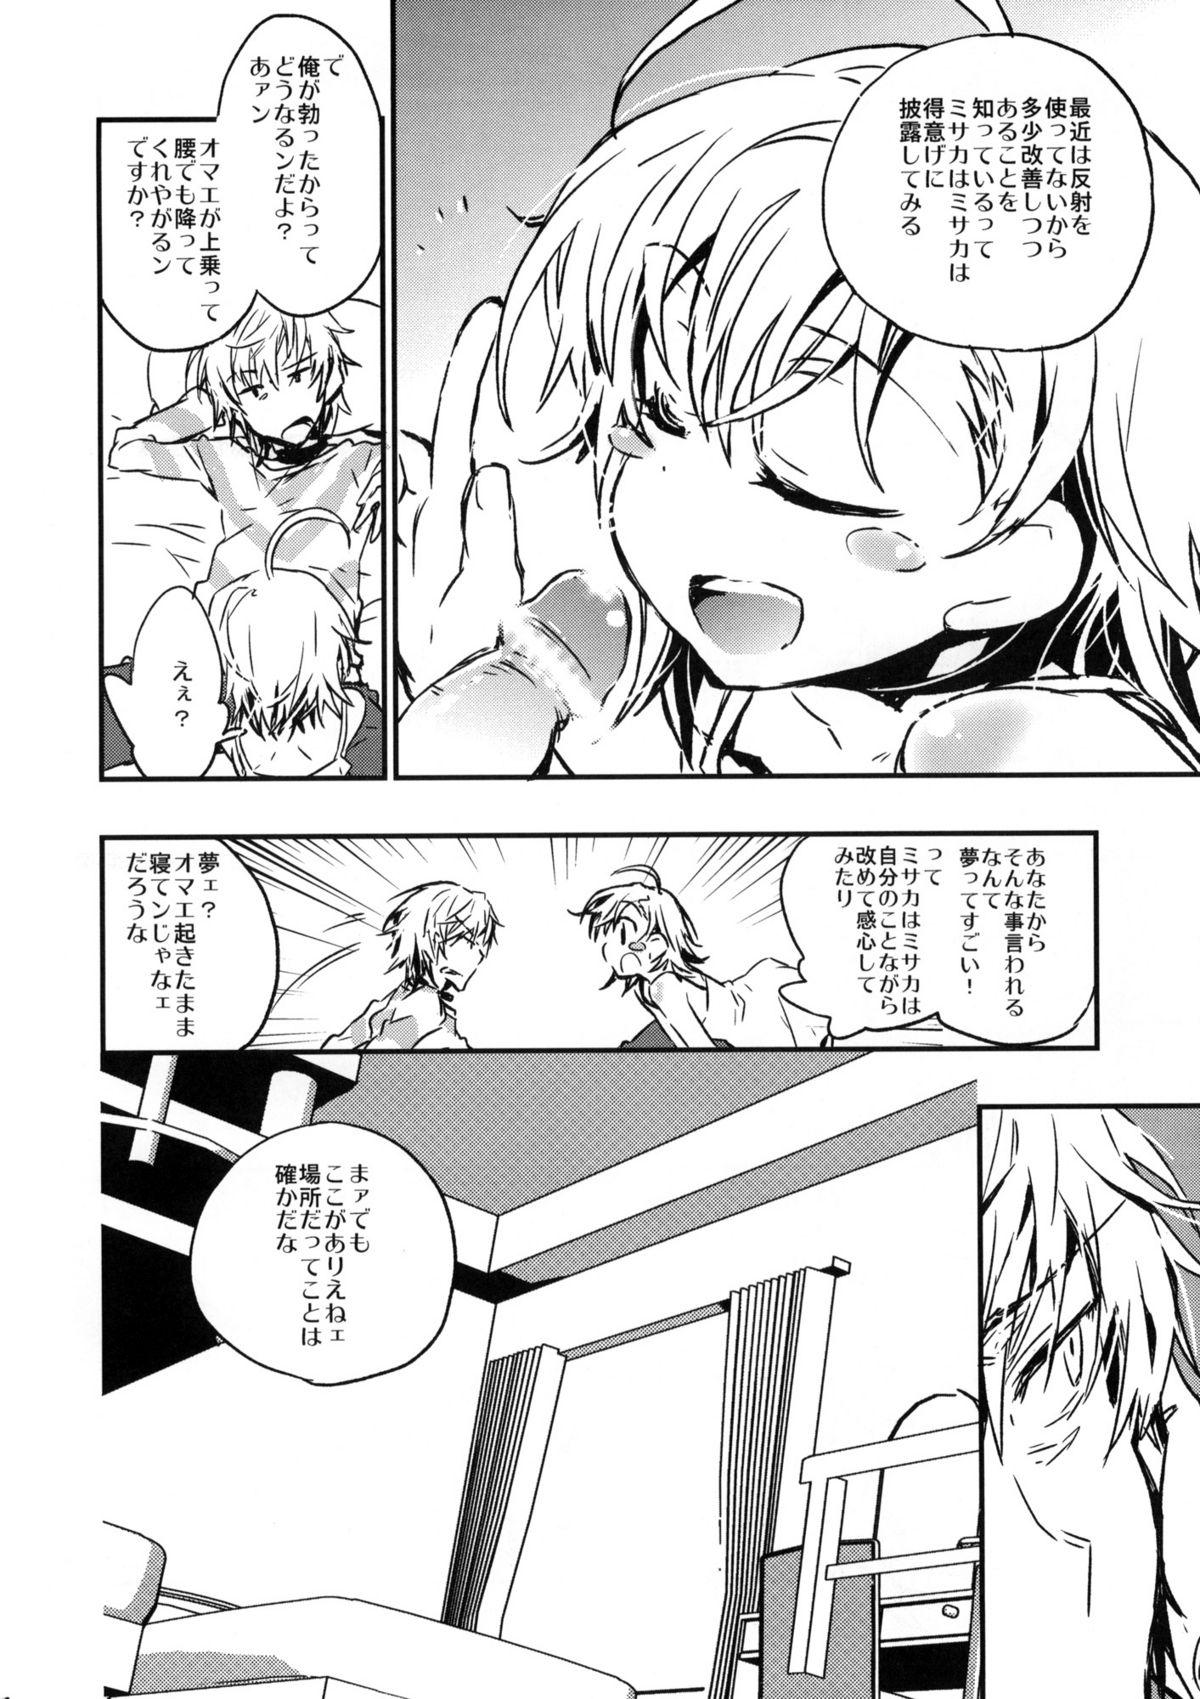 Pegging We're part of each other - Toaru majutsu no index Ex Gf - Page 5